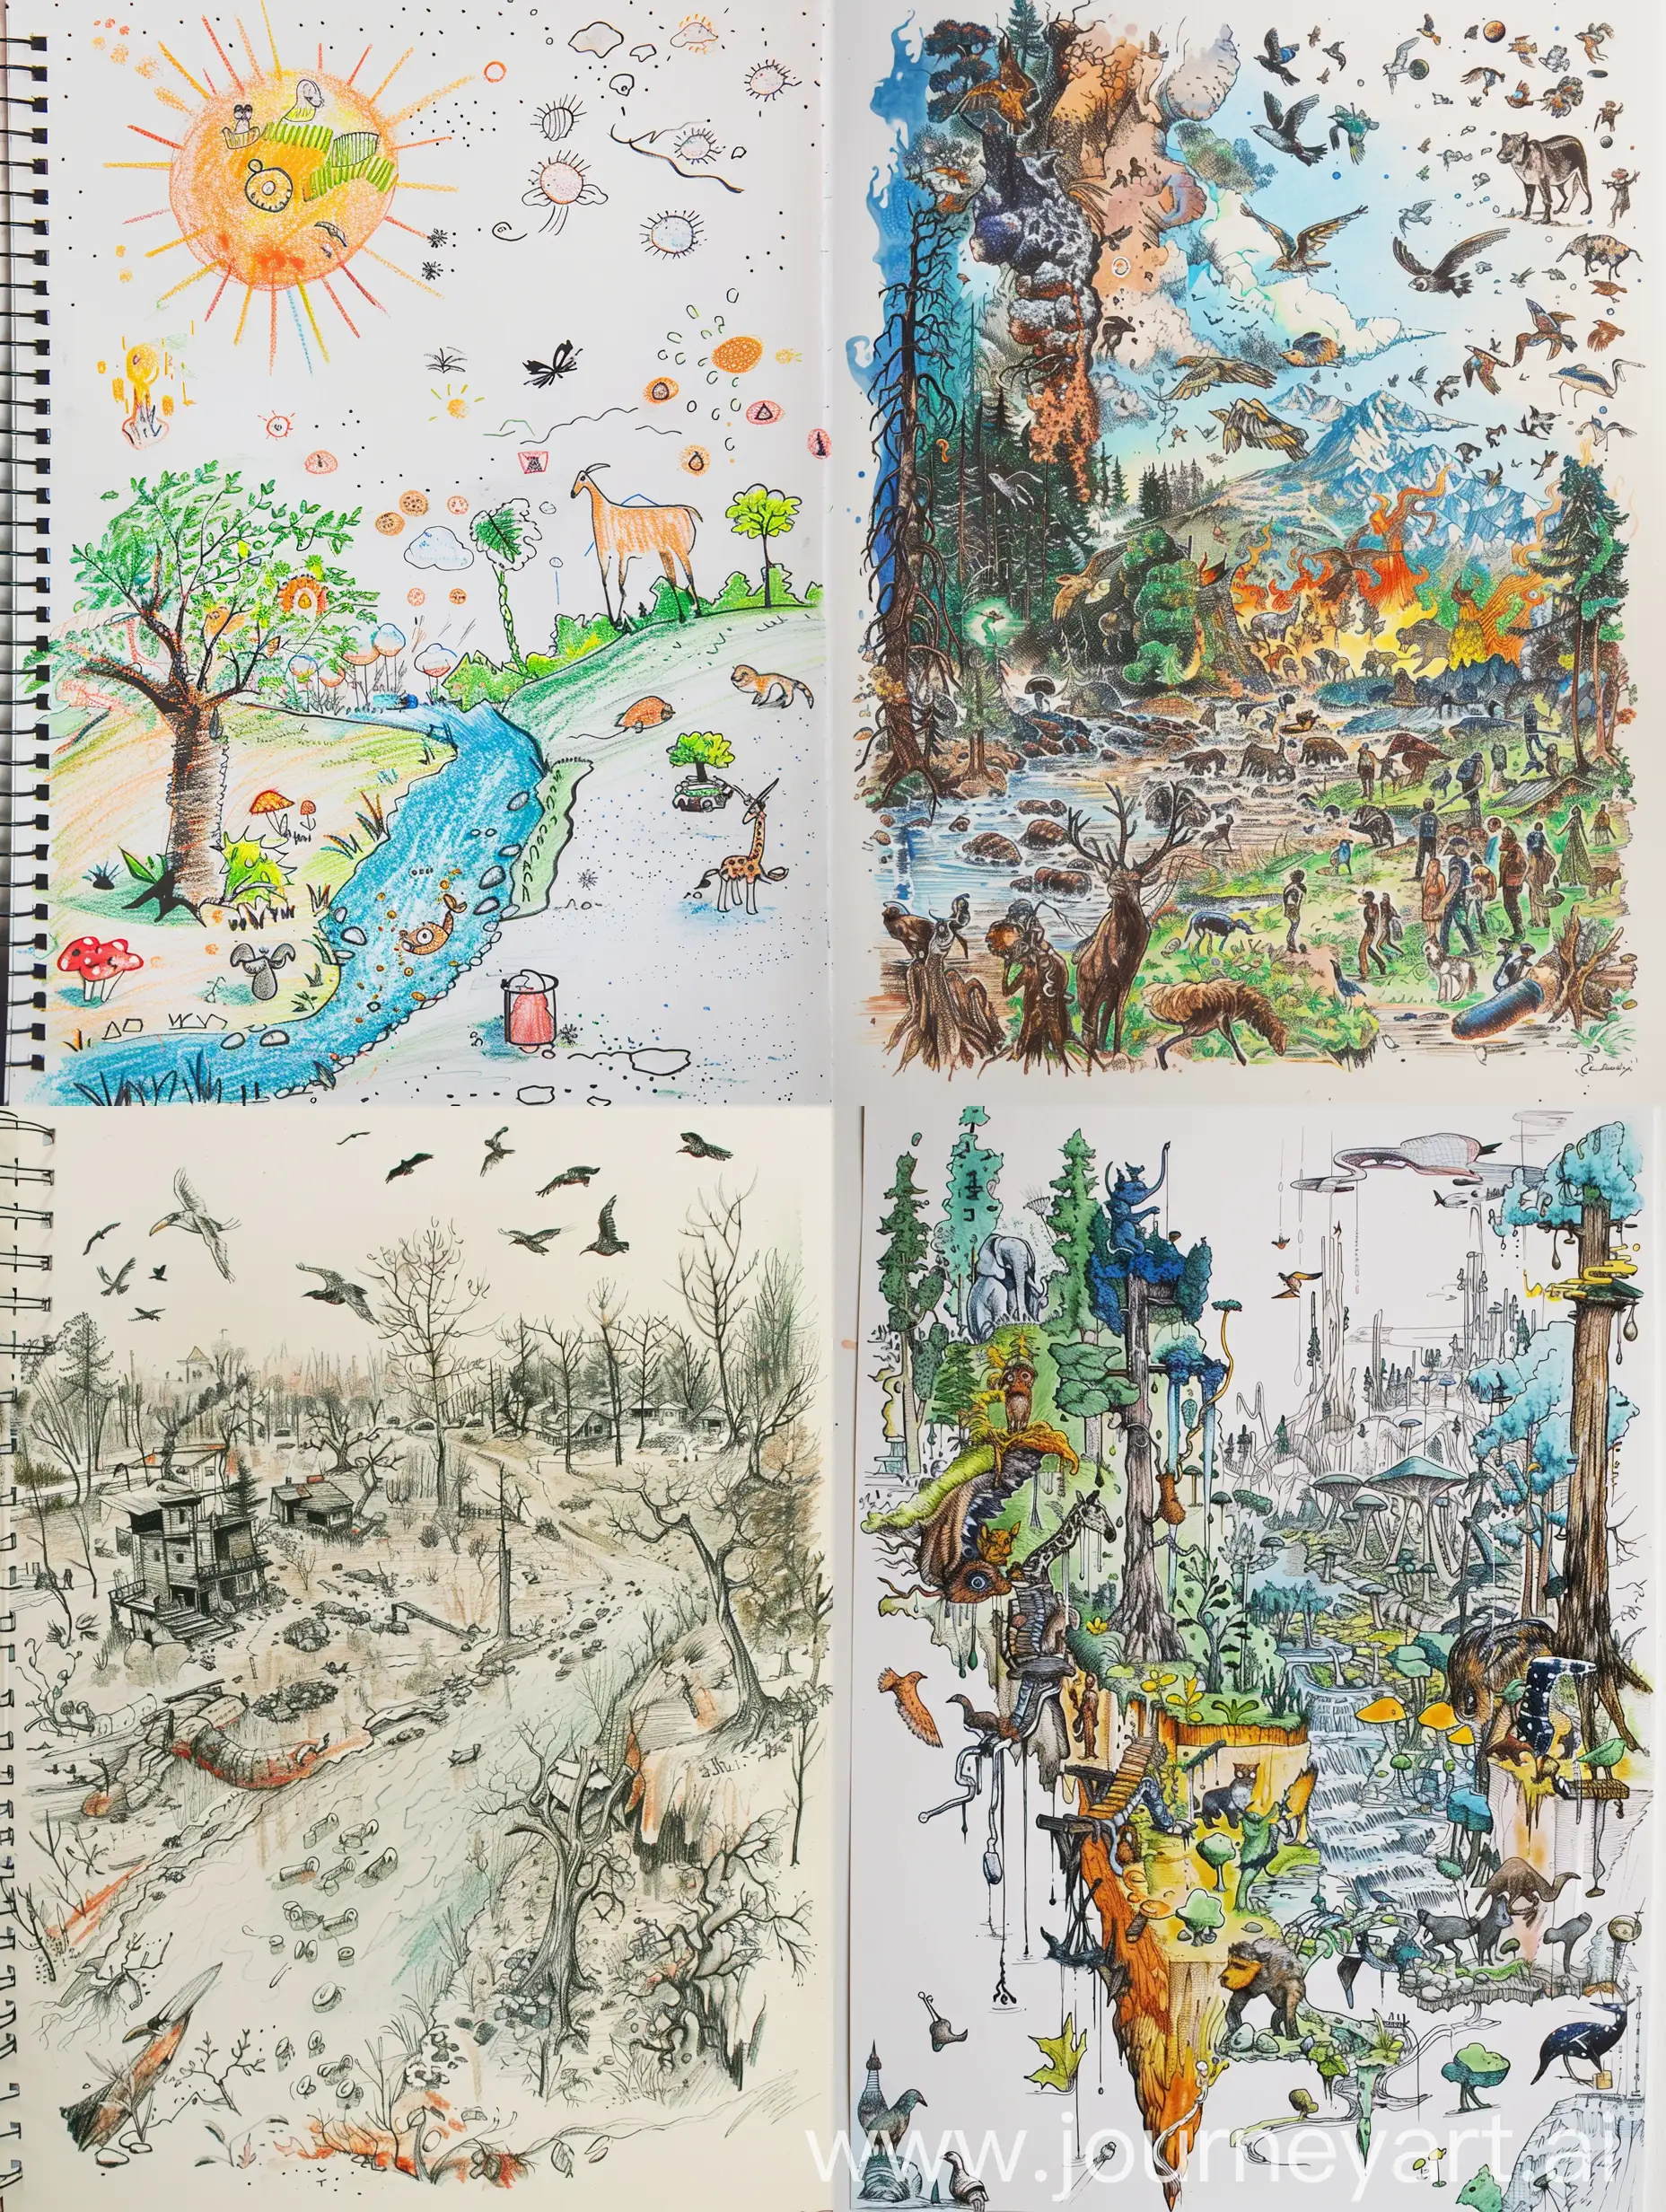 A rapid drawing about the positive and negative effects of human activities on habitats and nature that is suitable for drawing in a drawing book and fills the page.